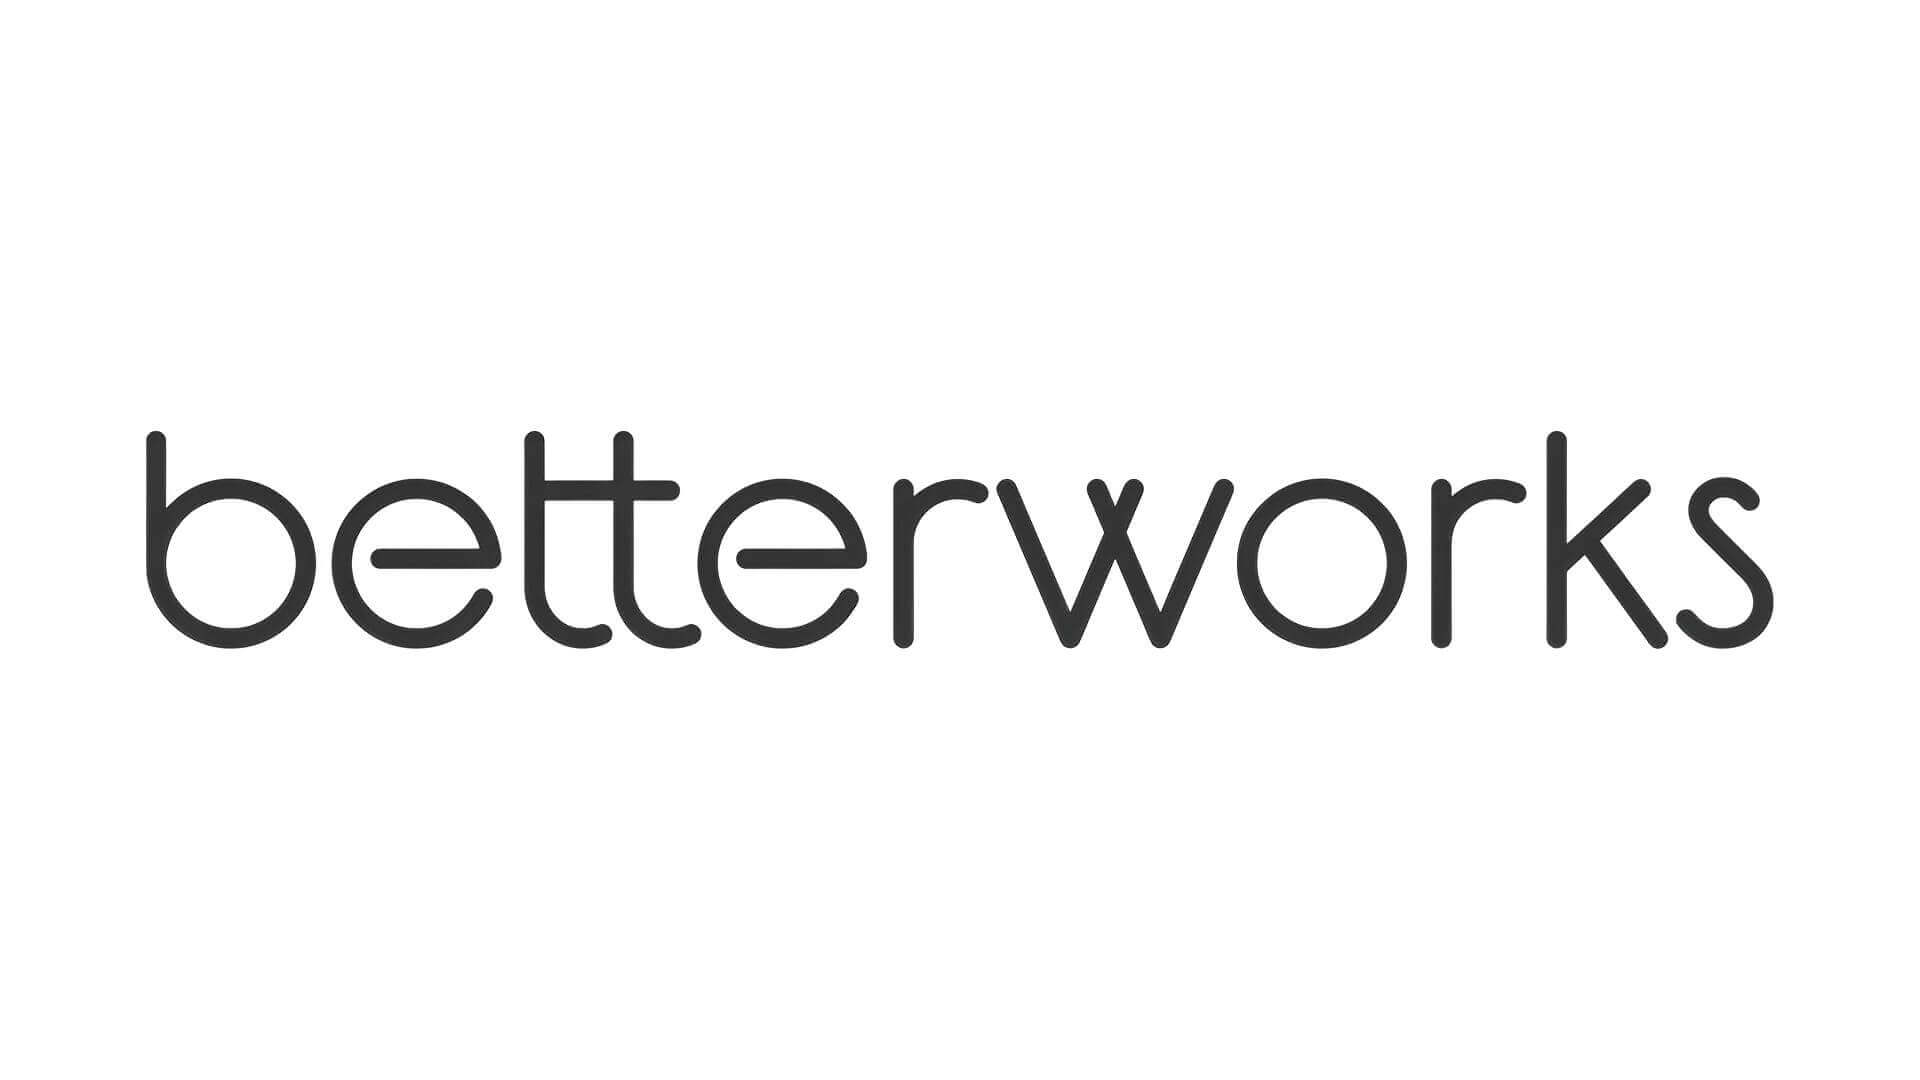 HR Software Solutions For Managing Employee Performance: betterworks